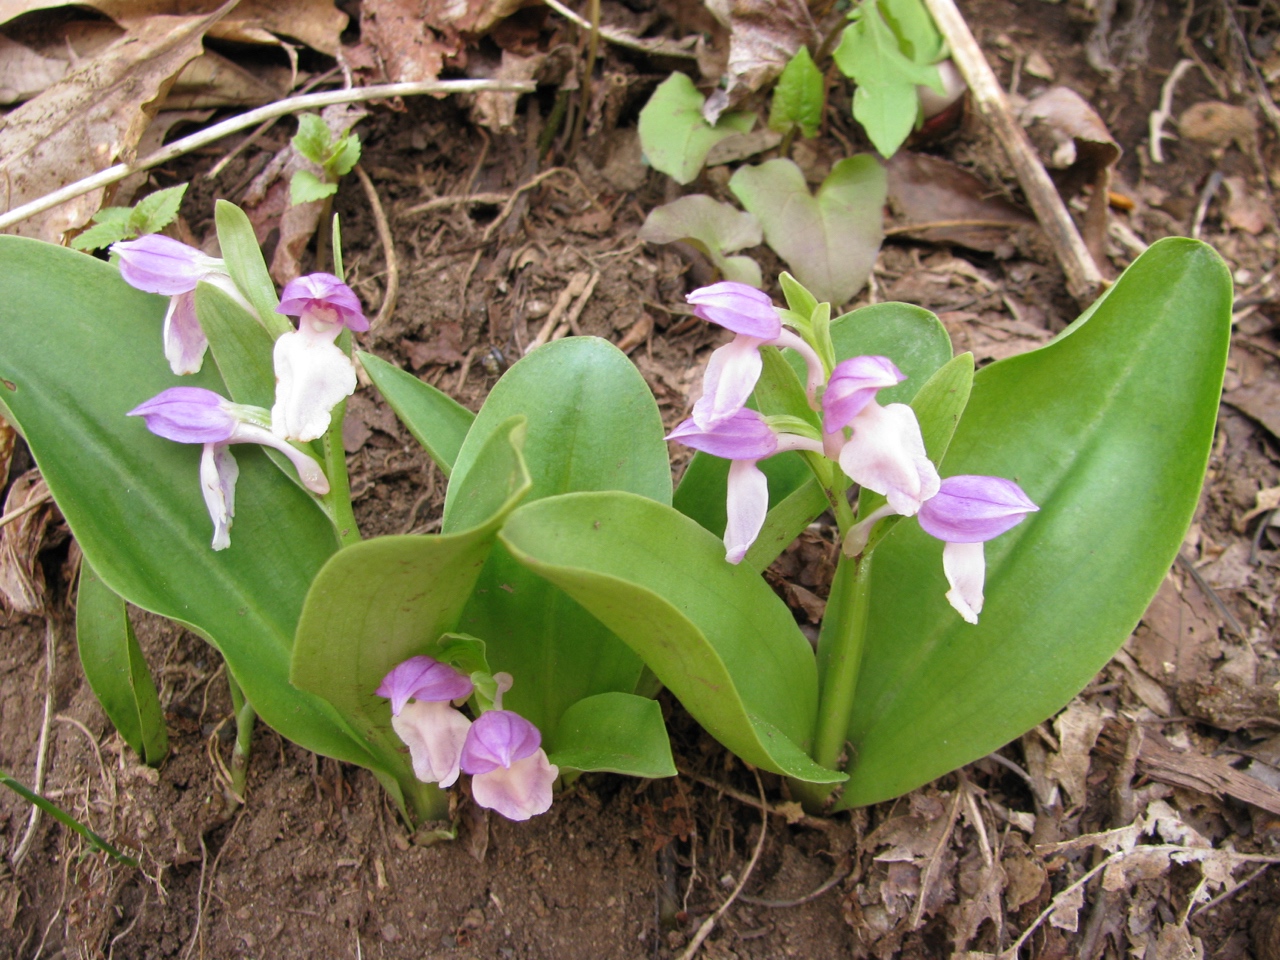 The Scientific Name is Galearis spectabilis [= Orchis spectabilis]. You will likely hear them called Showy Orchis. This picture shows the Flower scape arising from 2 basal leaves in late April of Galearis spectabilis [= Orchis spectabilis]